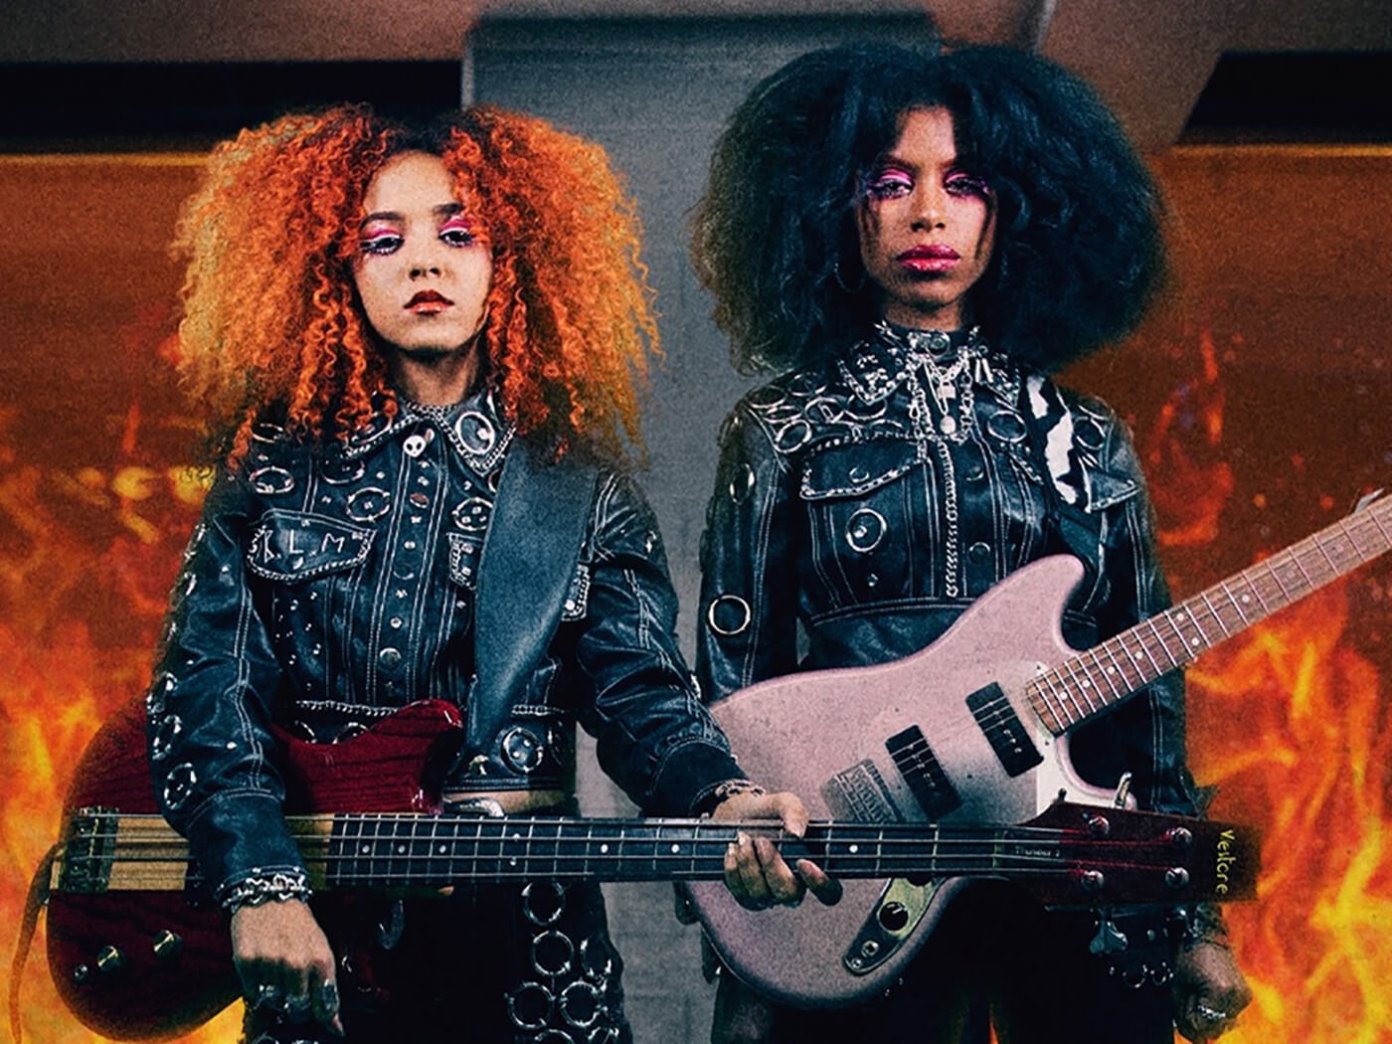 Nova Twins want to make rock a more diverse place: “There’s no other ...